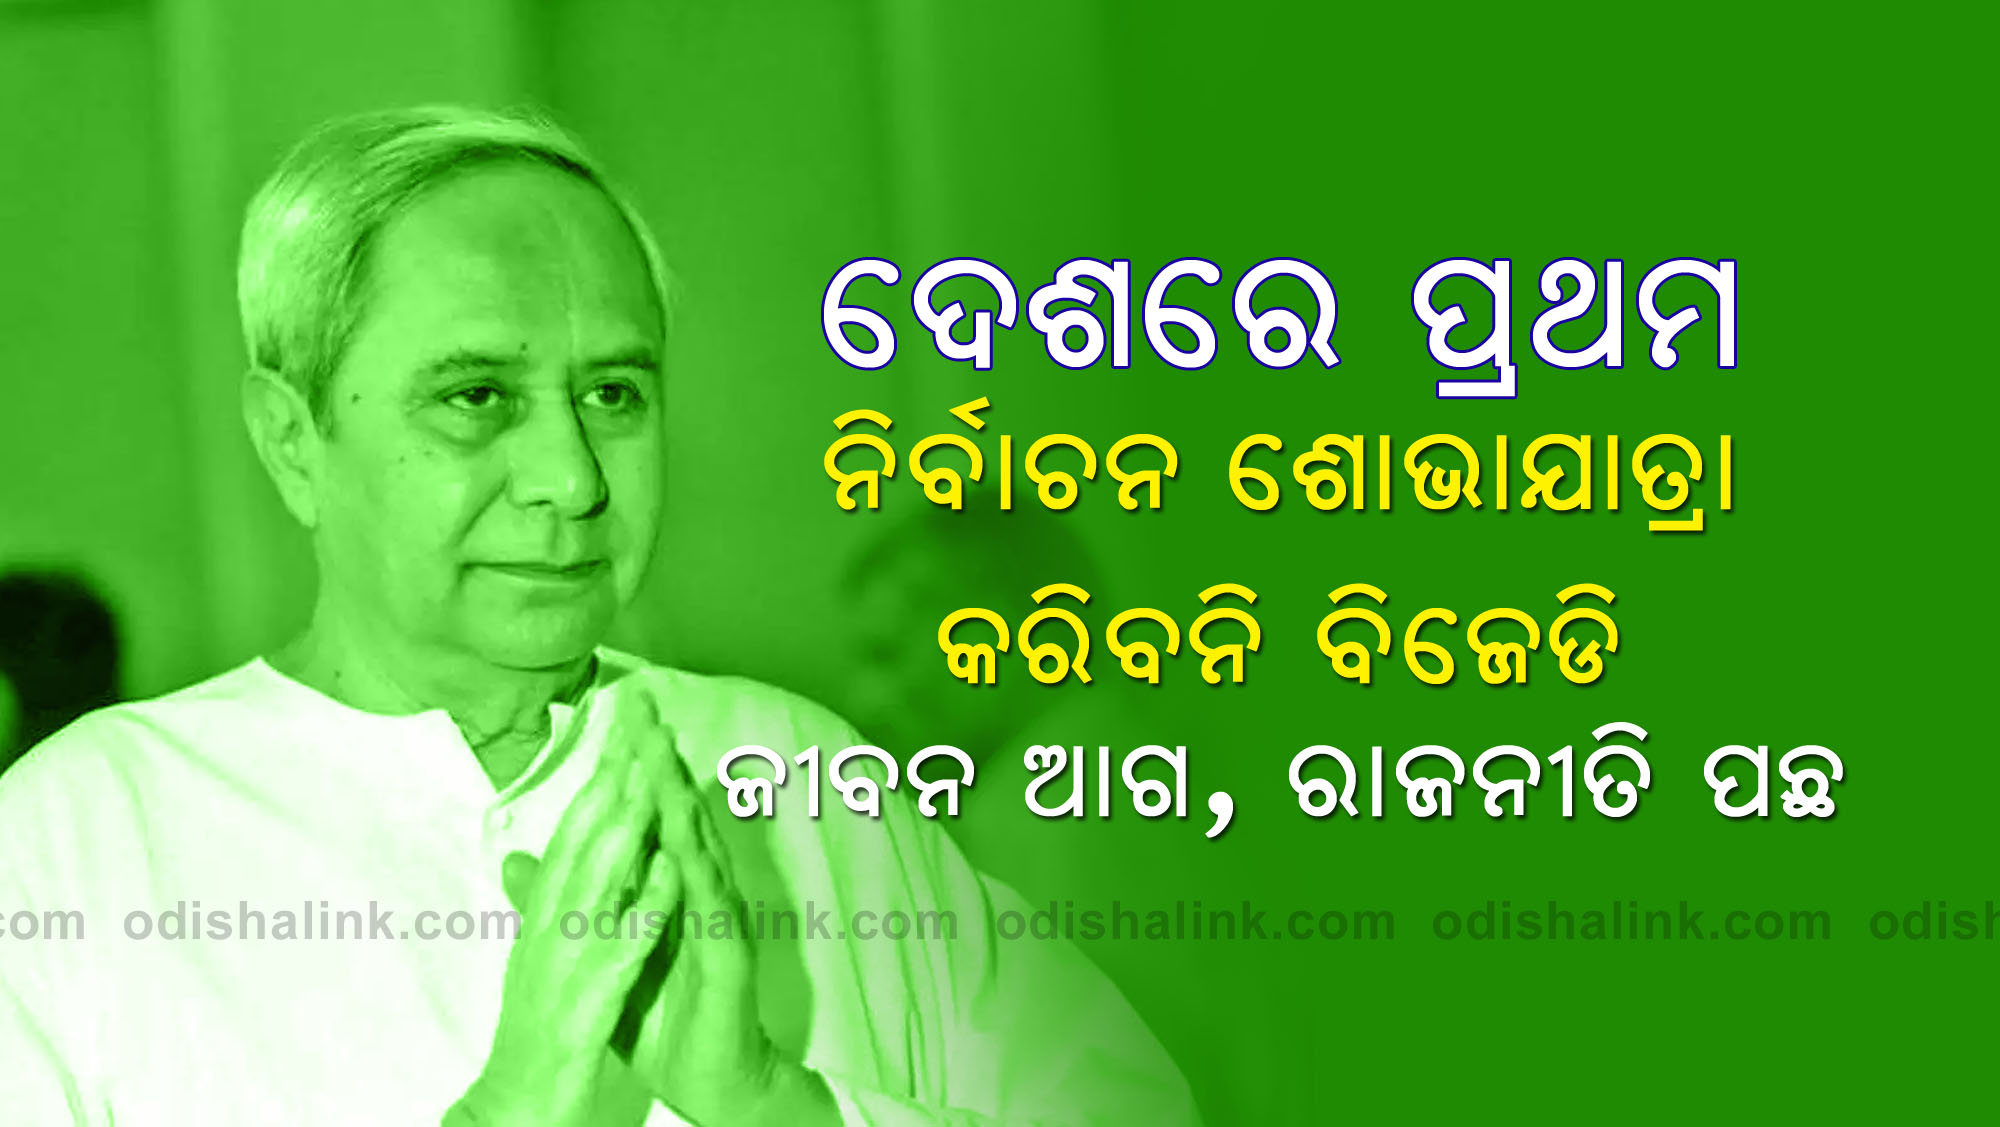 BJD not to hold election rally